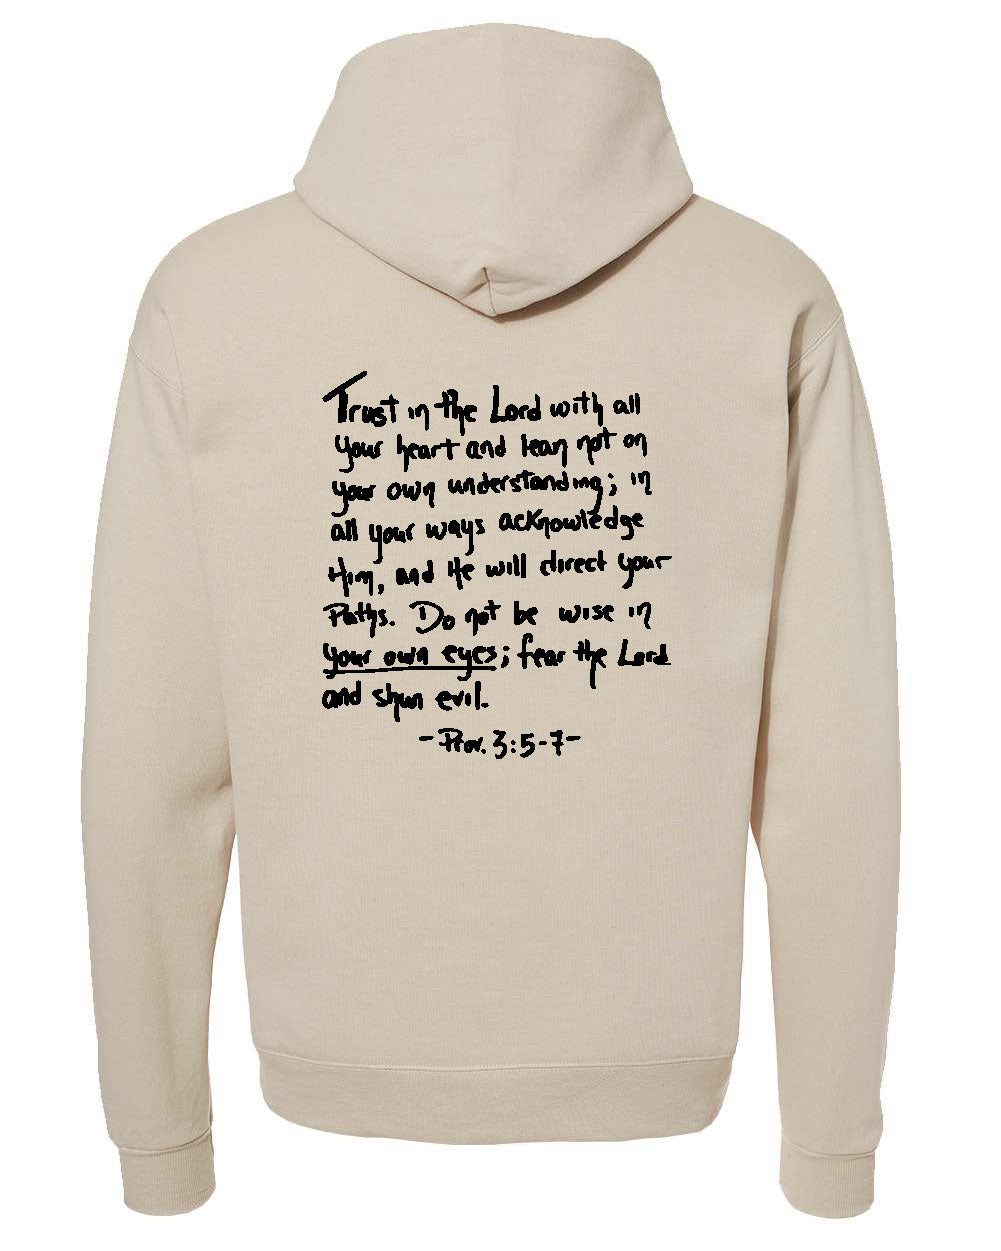 Imma See For Myself Hooded Pullover